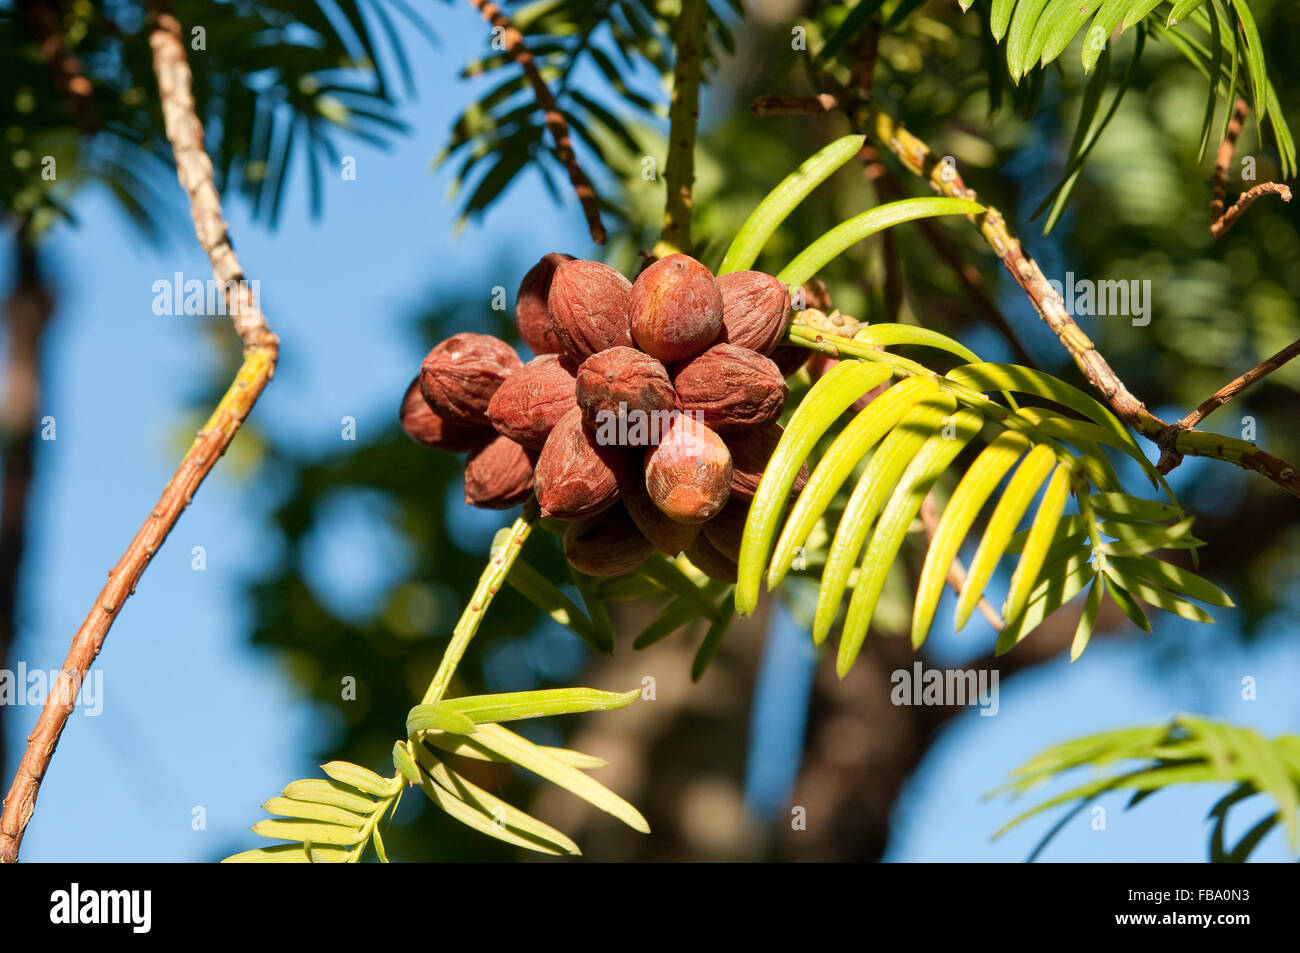 Leaves and fruits of Cowtail Pine, Cephalotaxus harringtonii Stock Photo